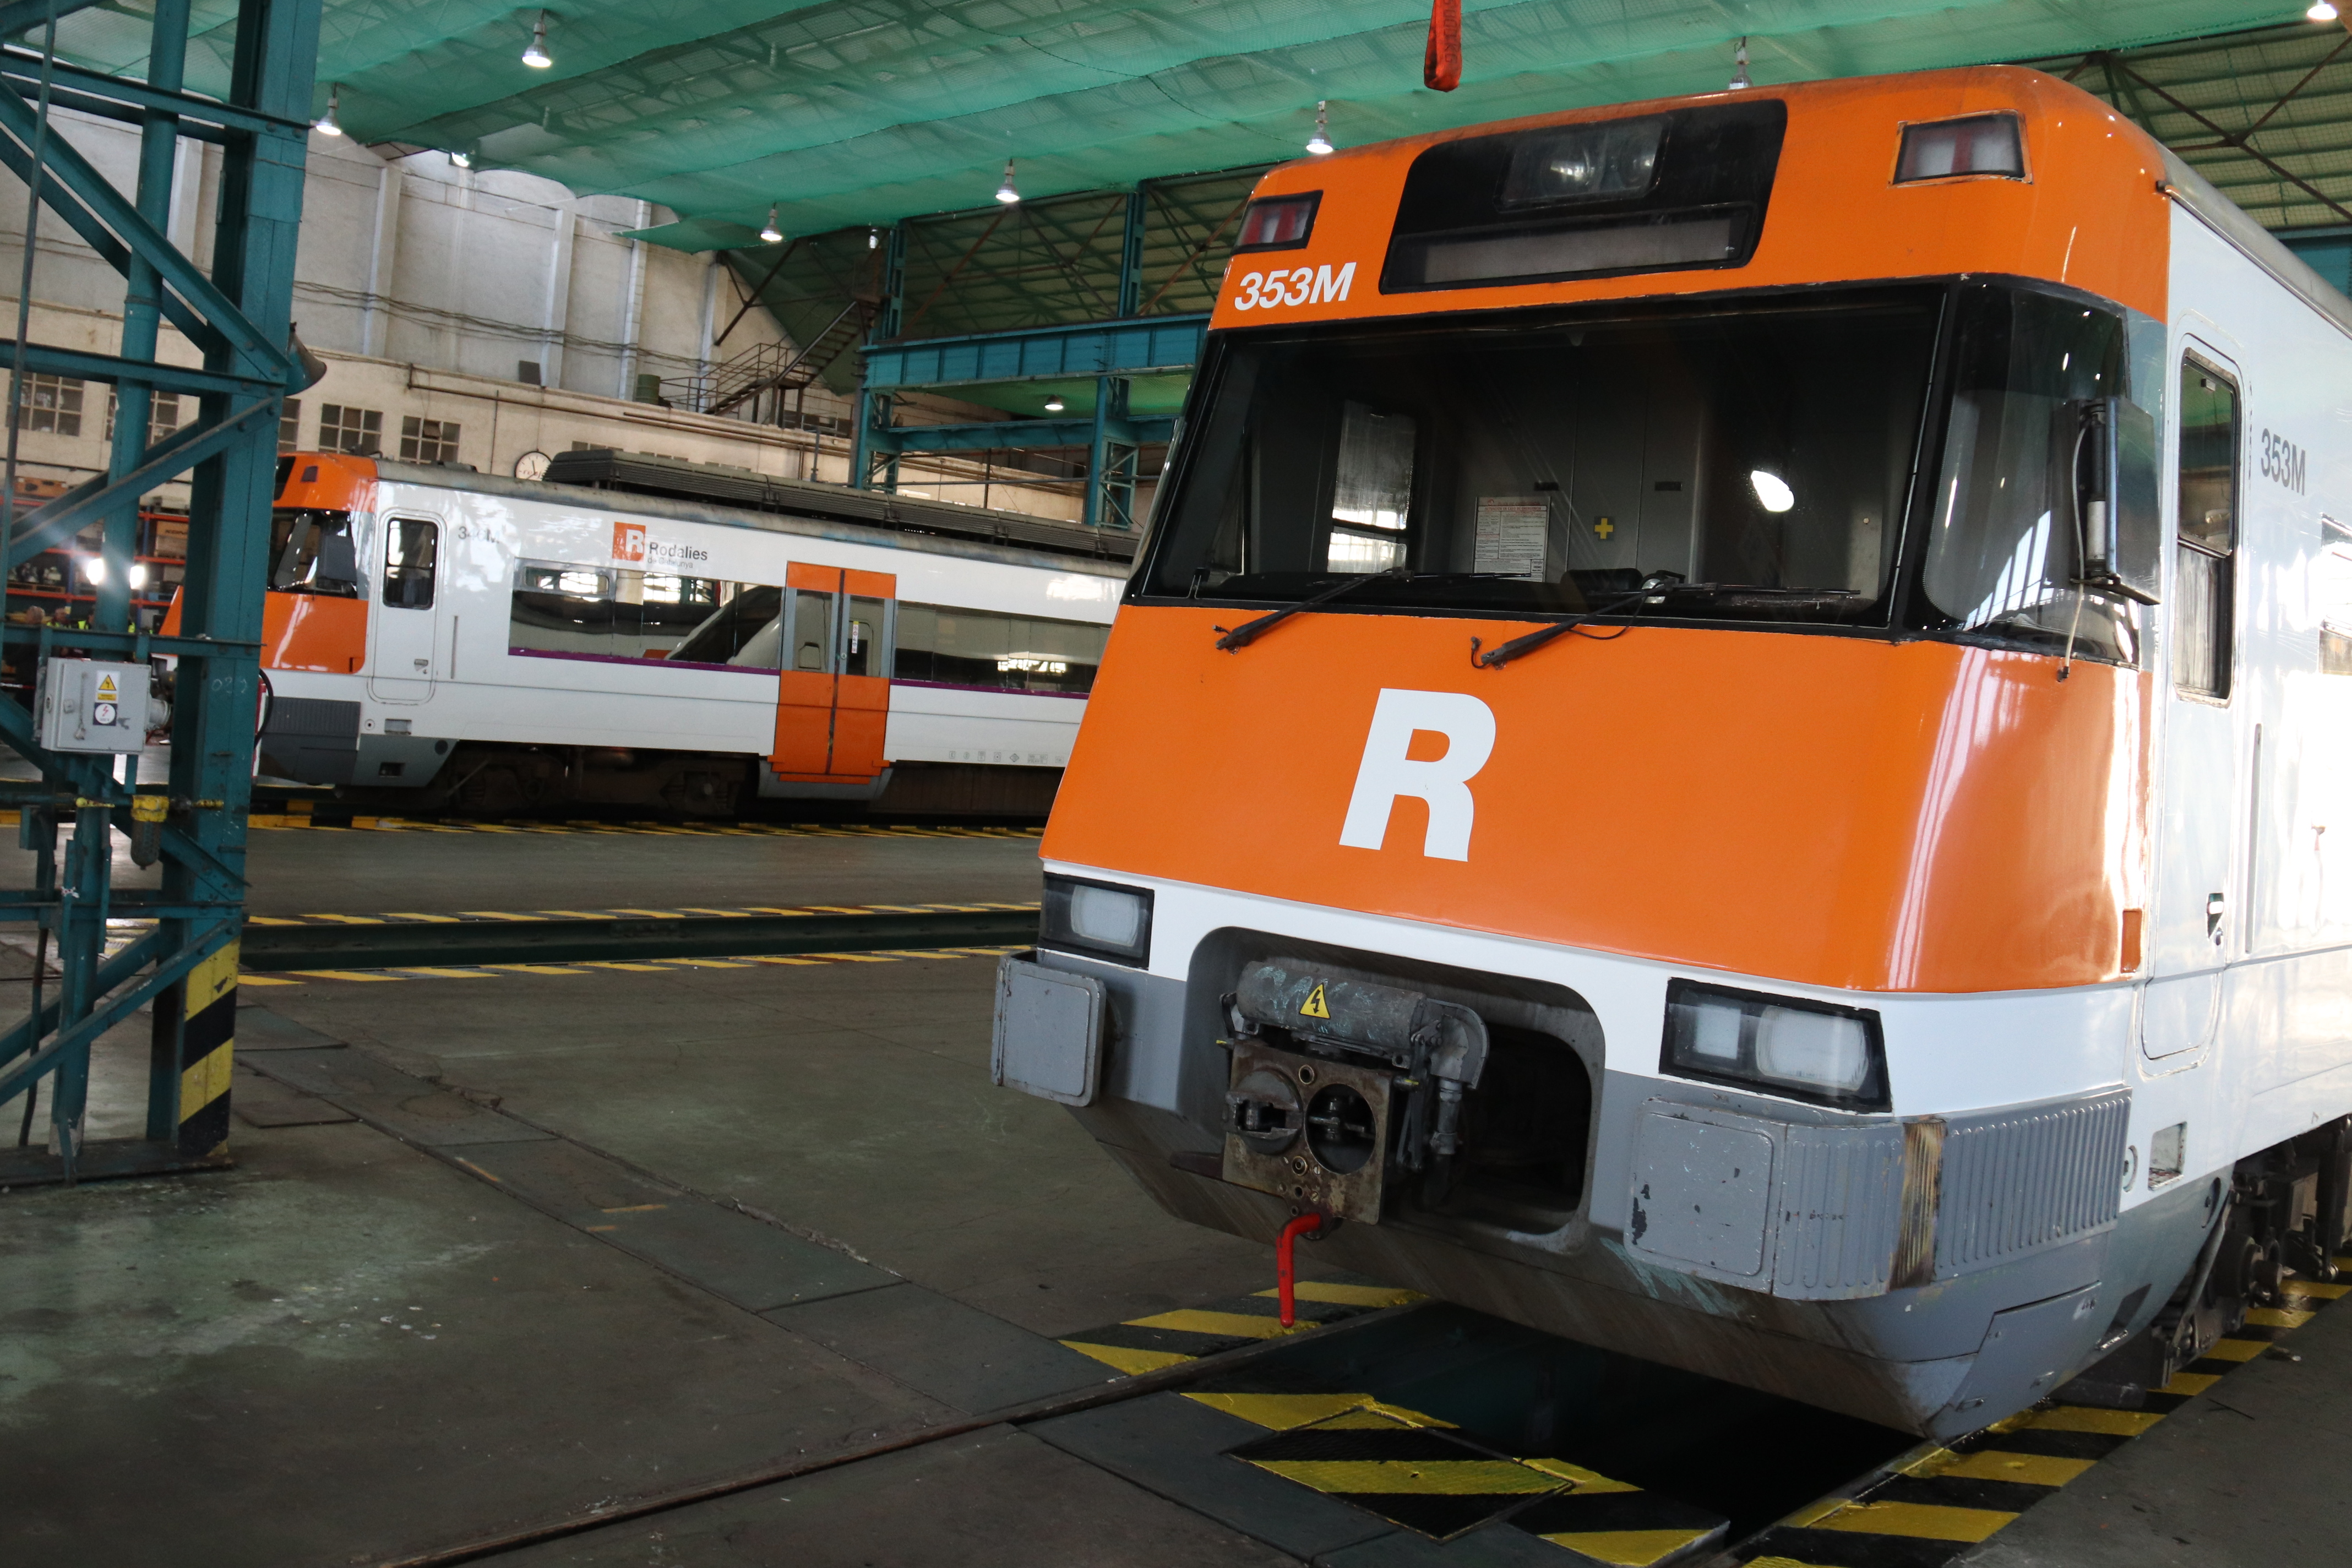 Rodalies Renfe trains in the Sant Andreu maintenance facility in Barcelona